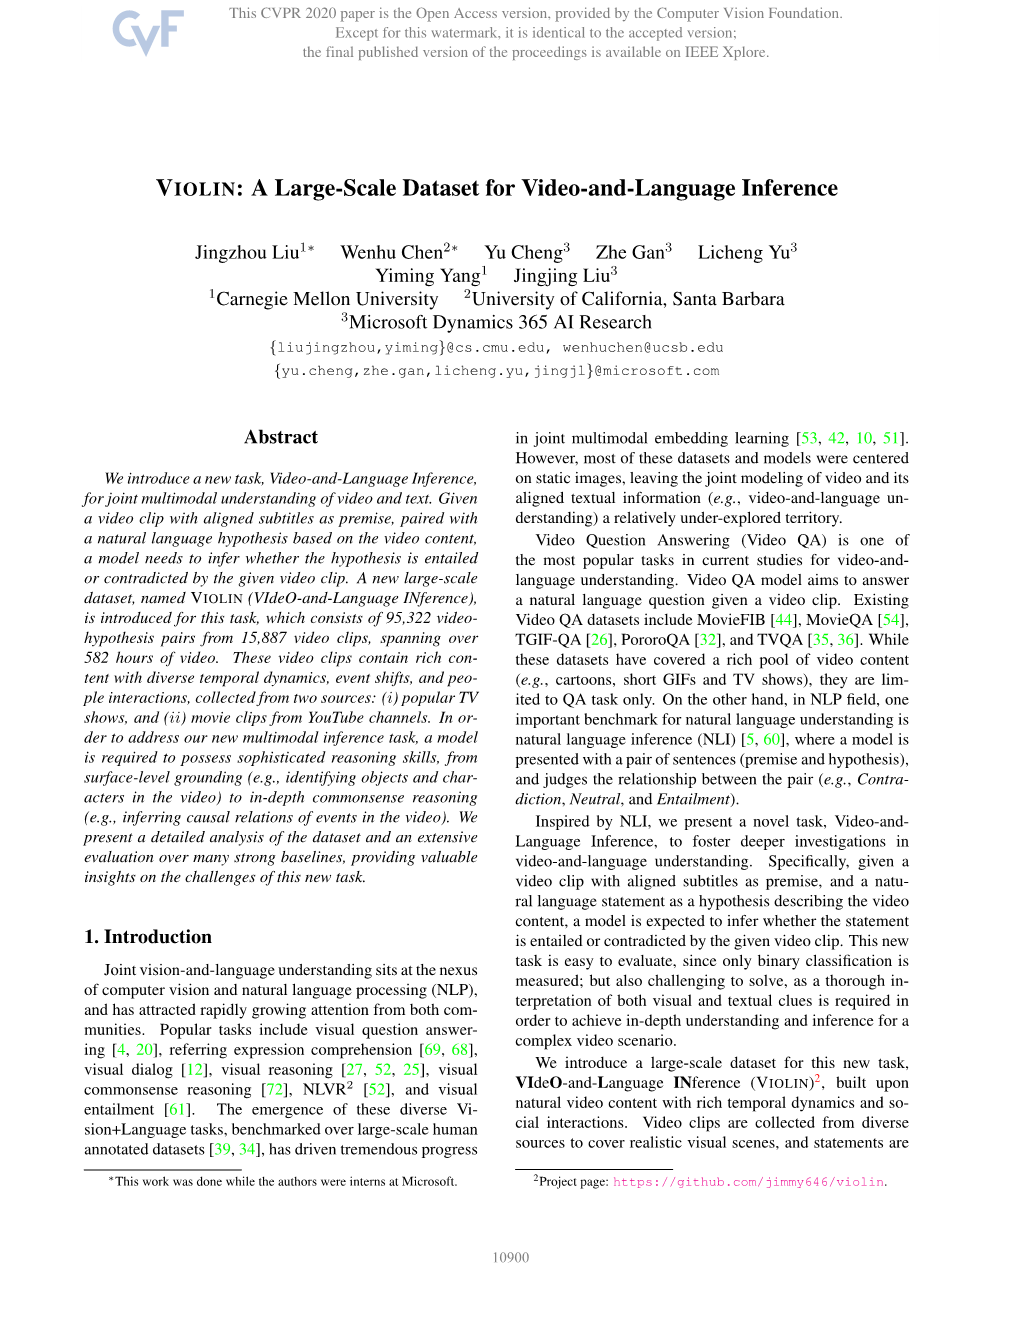 VIOLIN: a Large-Scale Dataset for Video-And-Language Inference